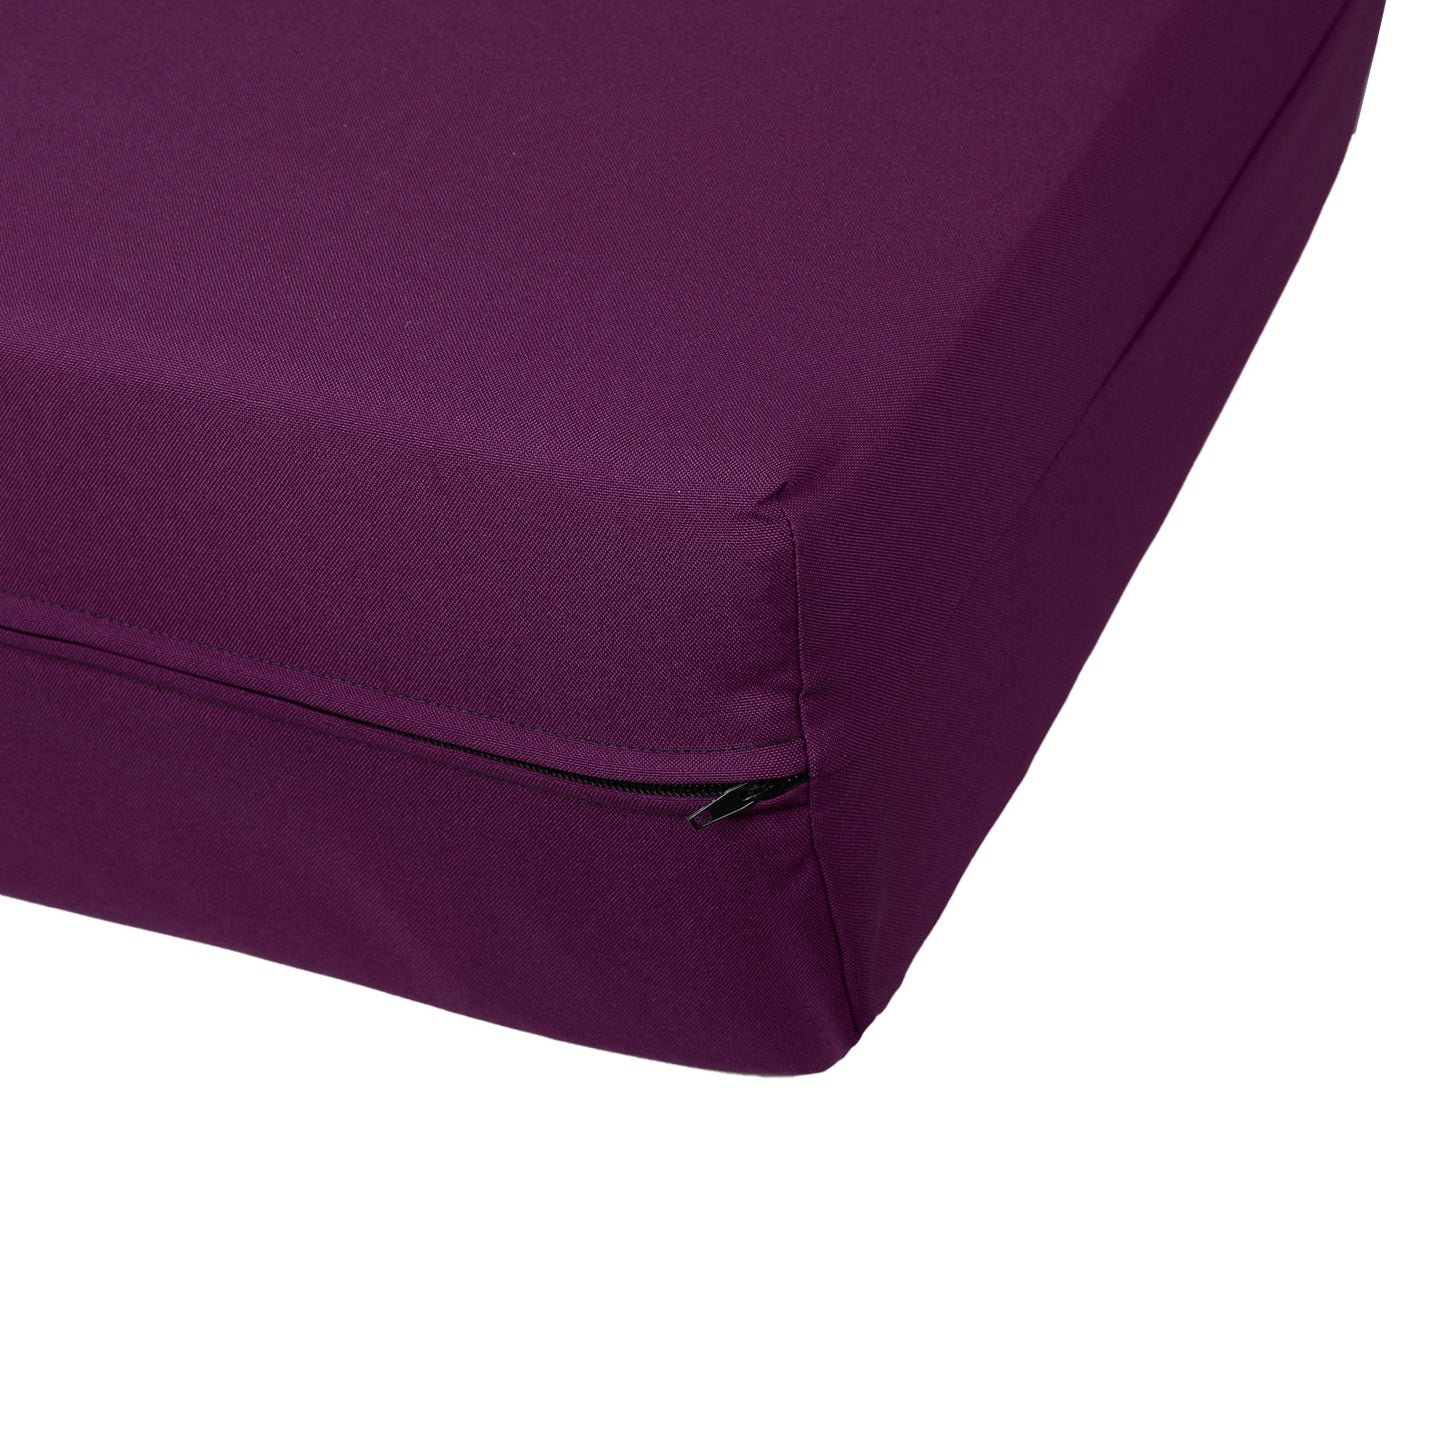 Futon Cover - Polyester - Twin Size 39"x75"x2"